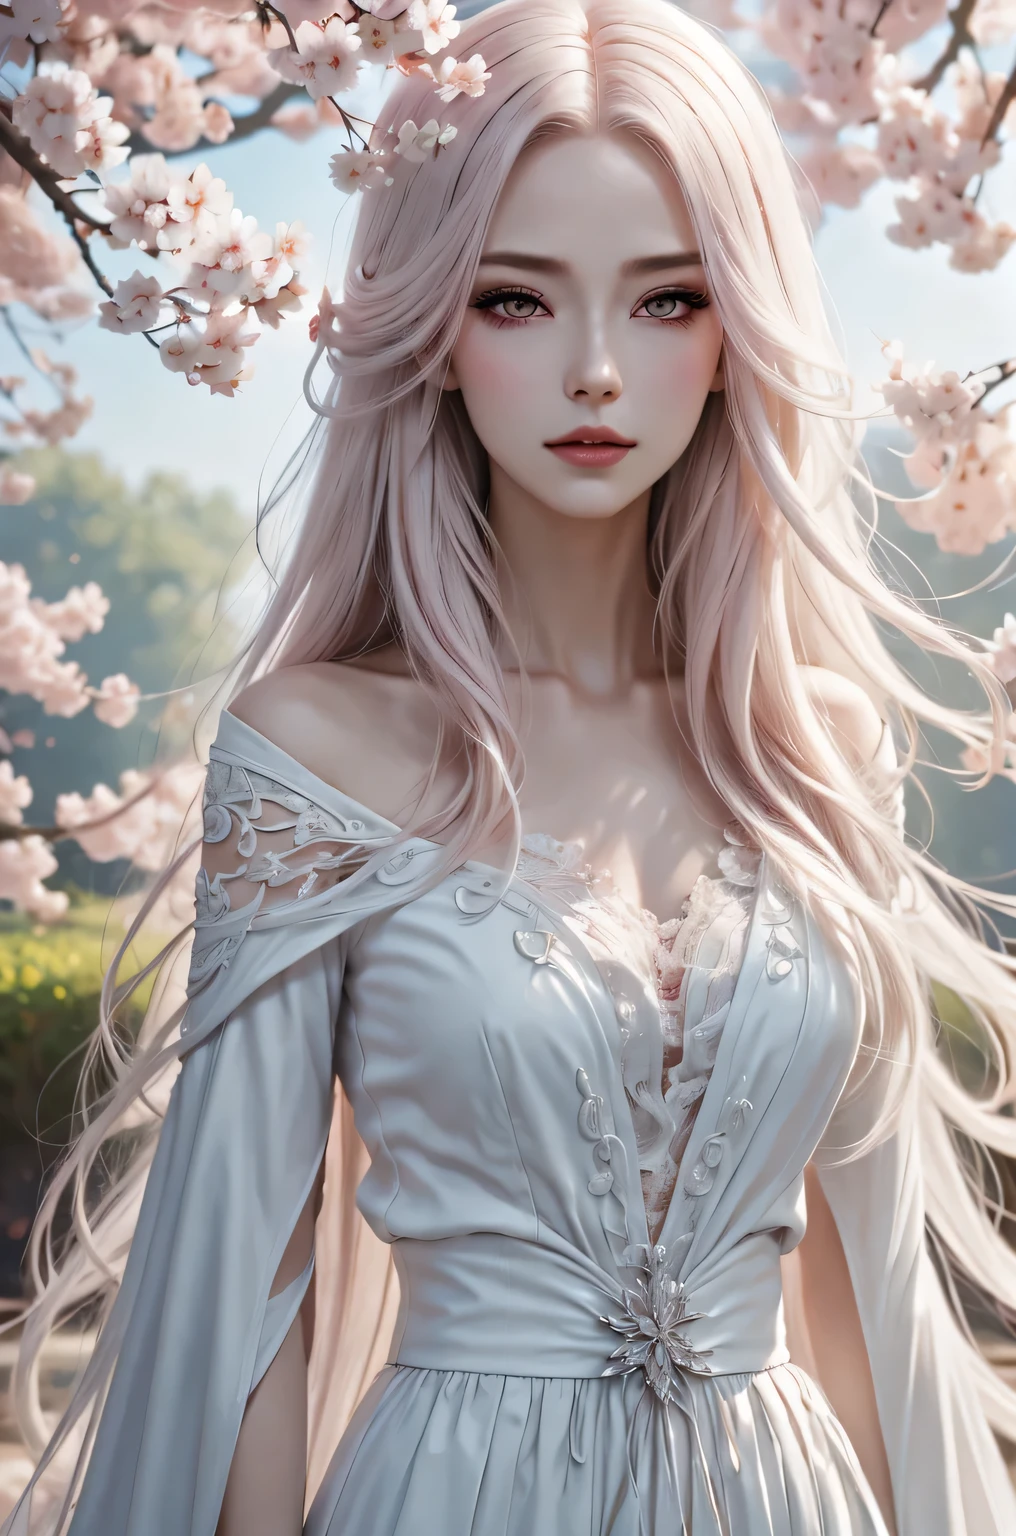 (best quality,4k,8k,high resolution,masterpiece:1.2),Super detailed,(actual,photoactual,photo-actual:1.37),Beautiful and delicate eyes,Beautiful and delicate lips,extremely detailed face,long eyelashes,1 girl,porcelain skin,red face,pink makeup,ruffled fancy dress,Delicate lace details,Long flowing hair,Plush hair accessories,Holding delicate cherry blossom branches,Floating cherry blossom petals,Soft pink and white color scheme,ethereal lights,Lush、Vibrant garden backdrop,Soft sunlight filtering through the trees,Cherry blossom trees are in full bloom,peaceful atmosphere,Faint cherry blossom fragrance,Fantastic romantic atmosphere.